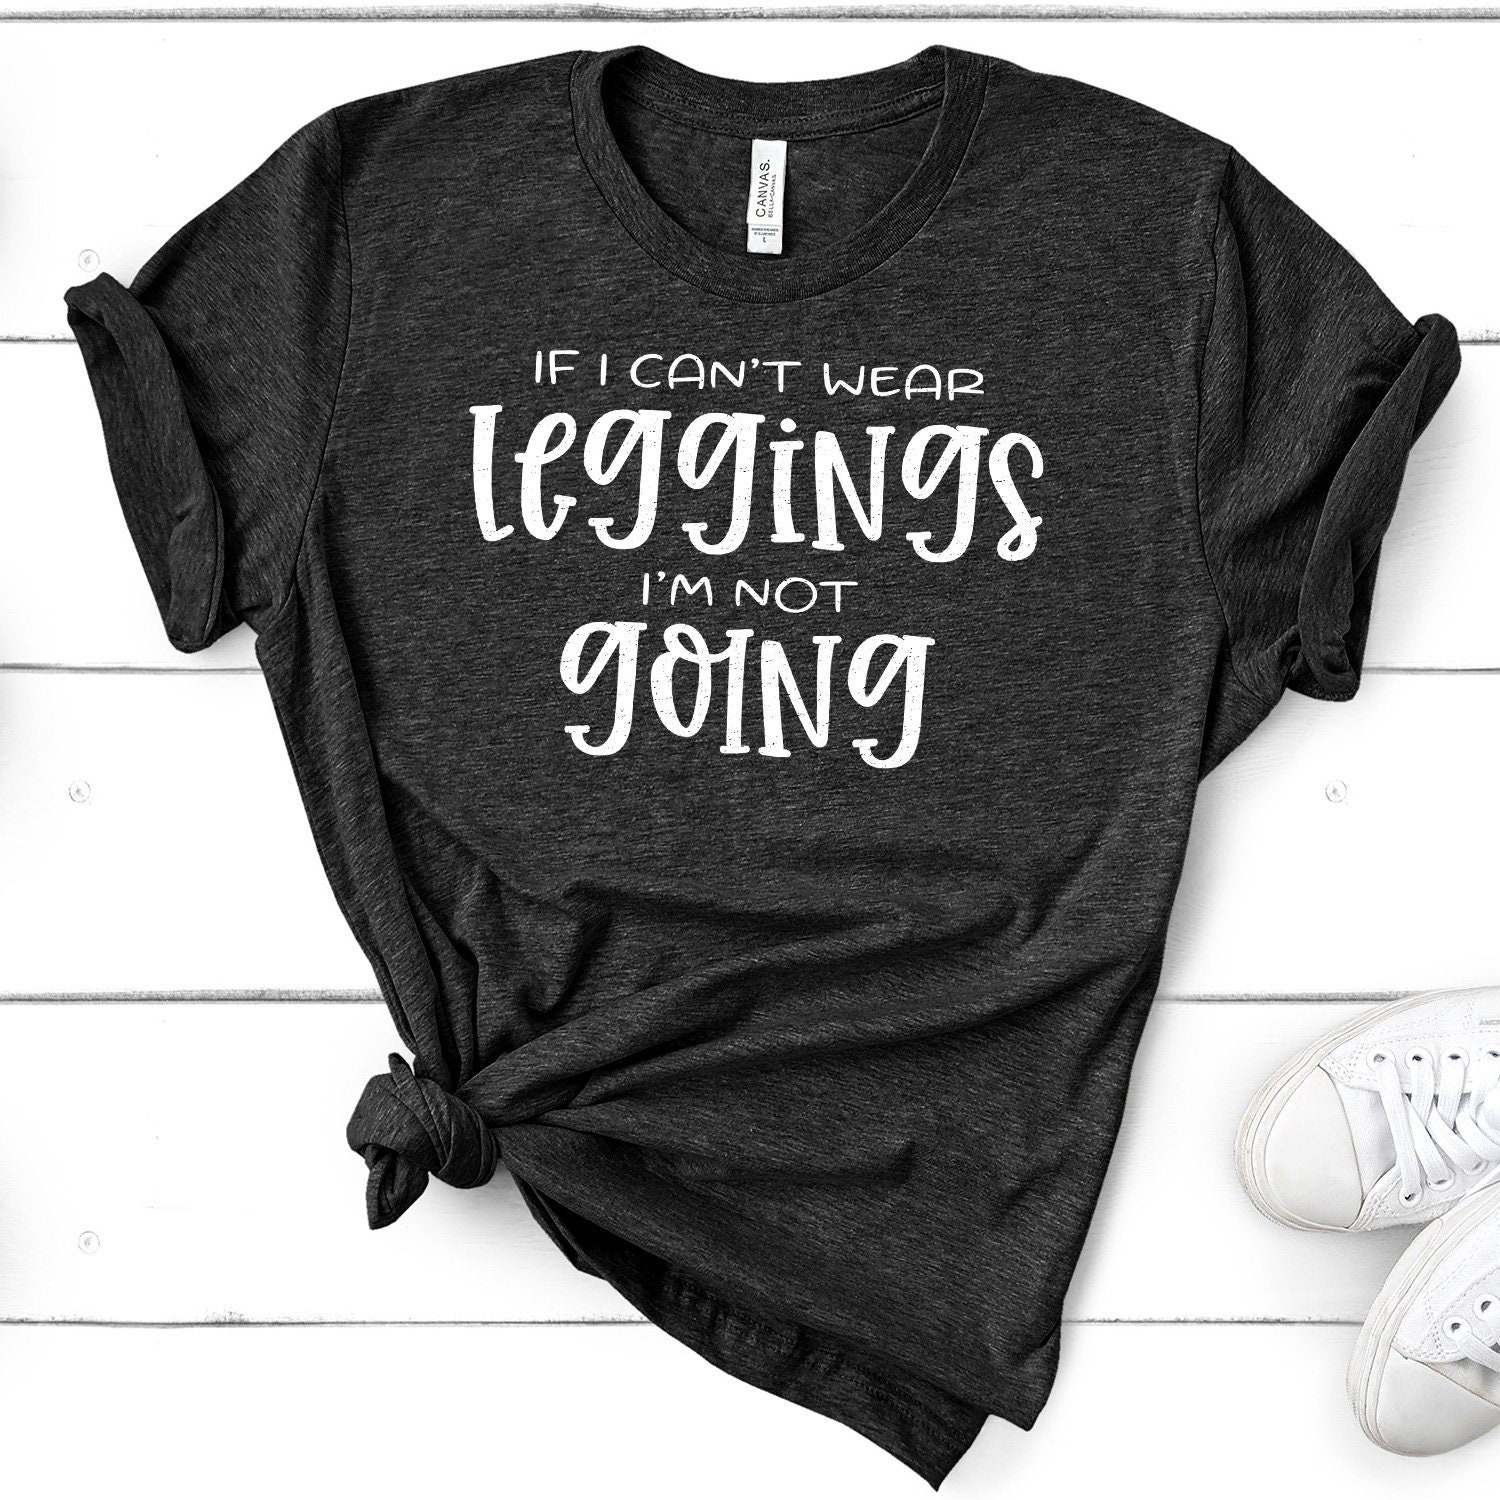 If I Can't Wear Leggings I'm Not Going T-shirt Adult Themed Cute Quote Soft  Cotton Unisex Tee Shirts 